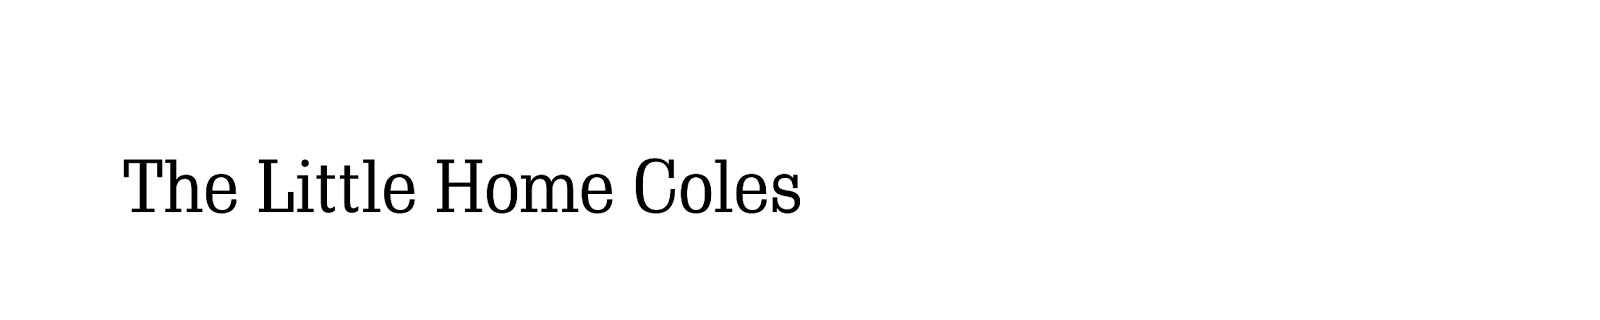 The Little Home Coles